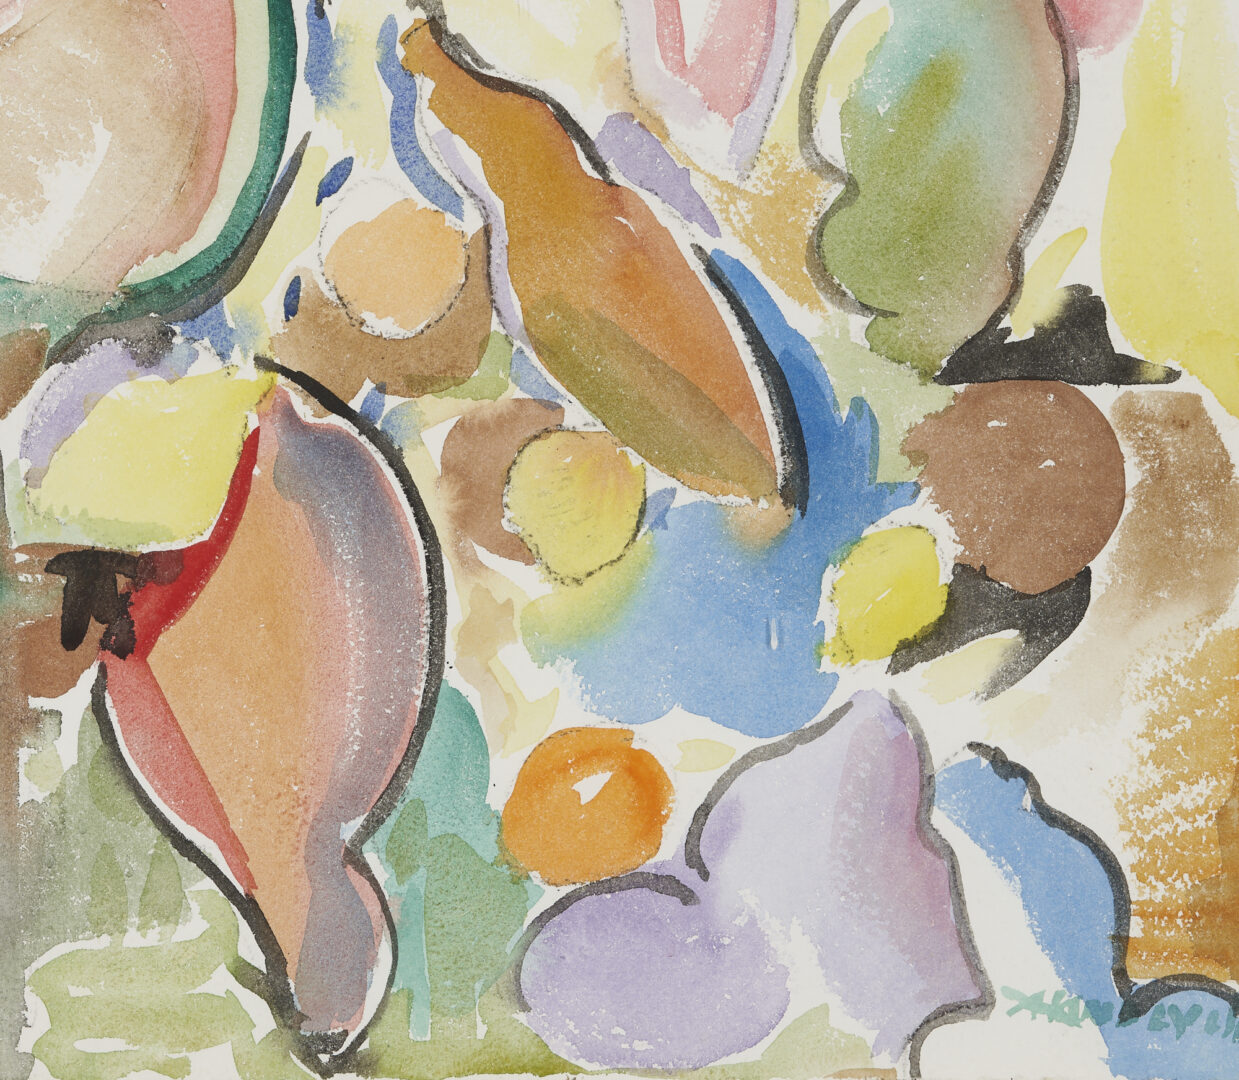 Lot 137: Avery Handley Modernist Watercolor Painting